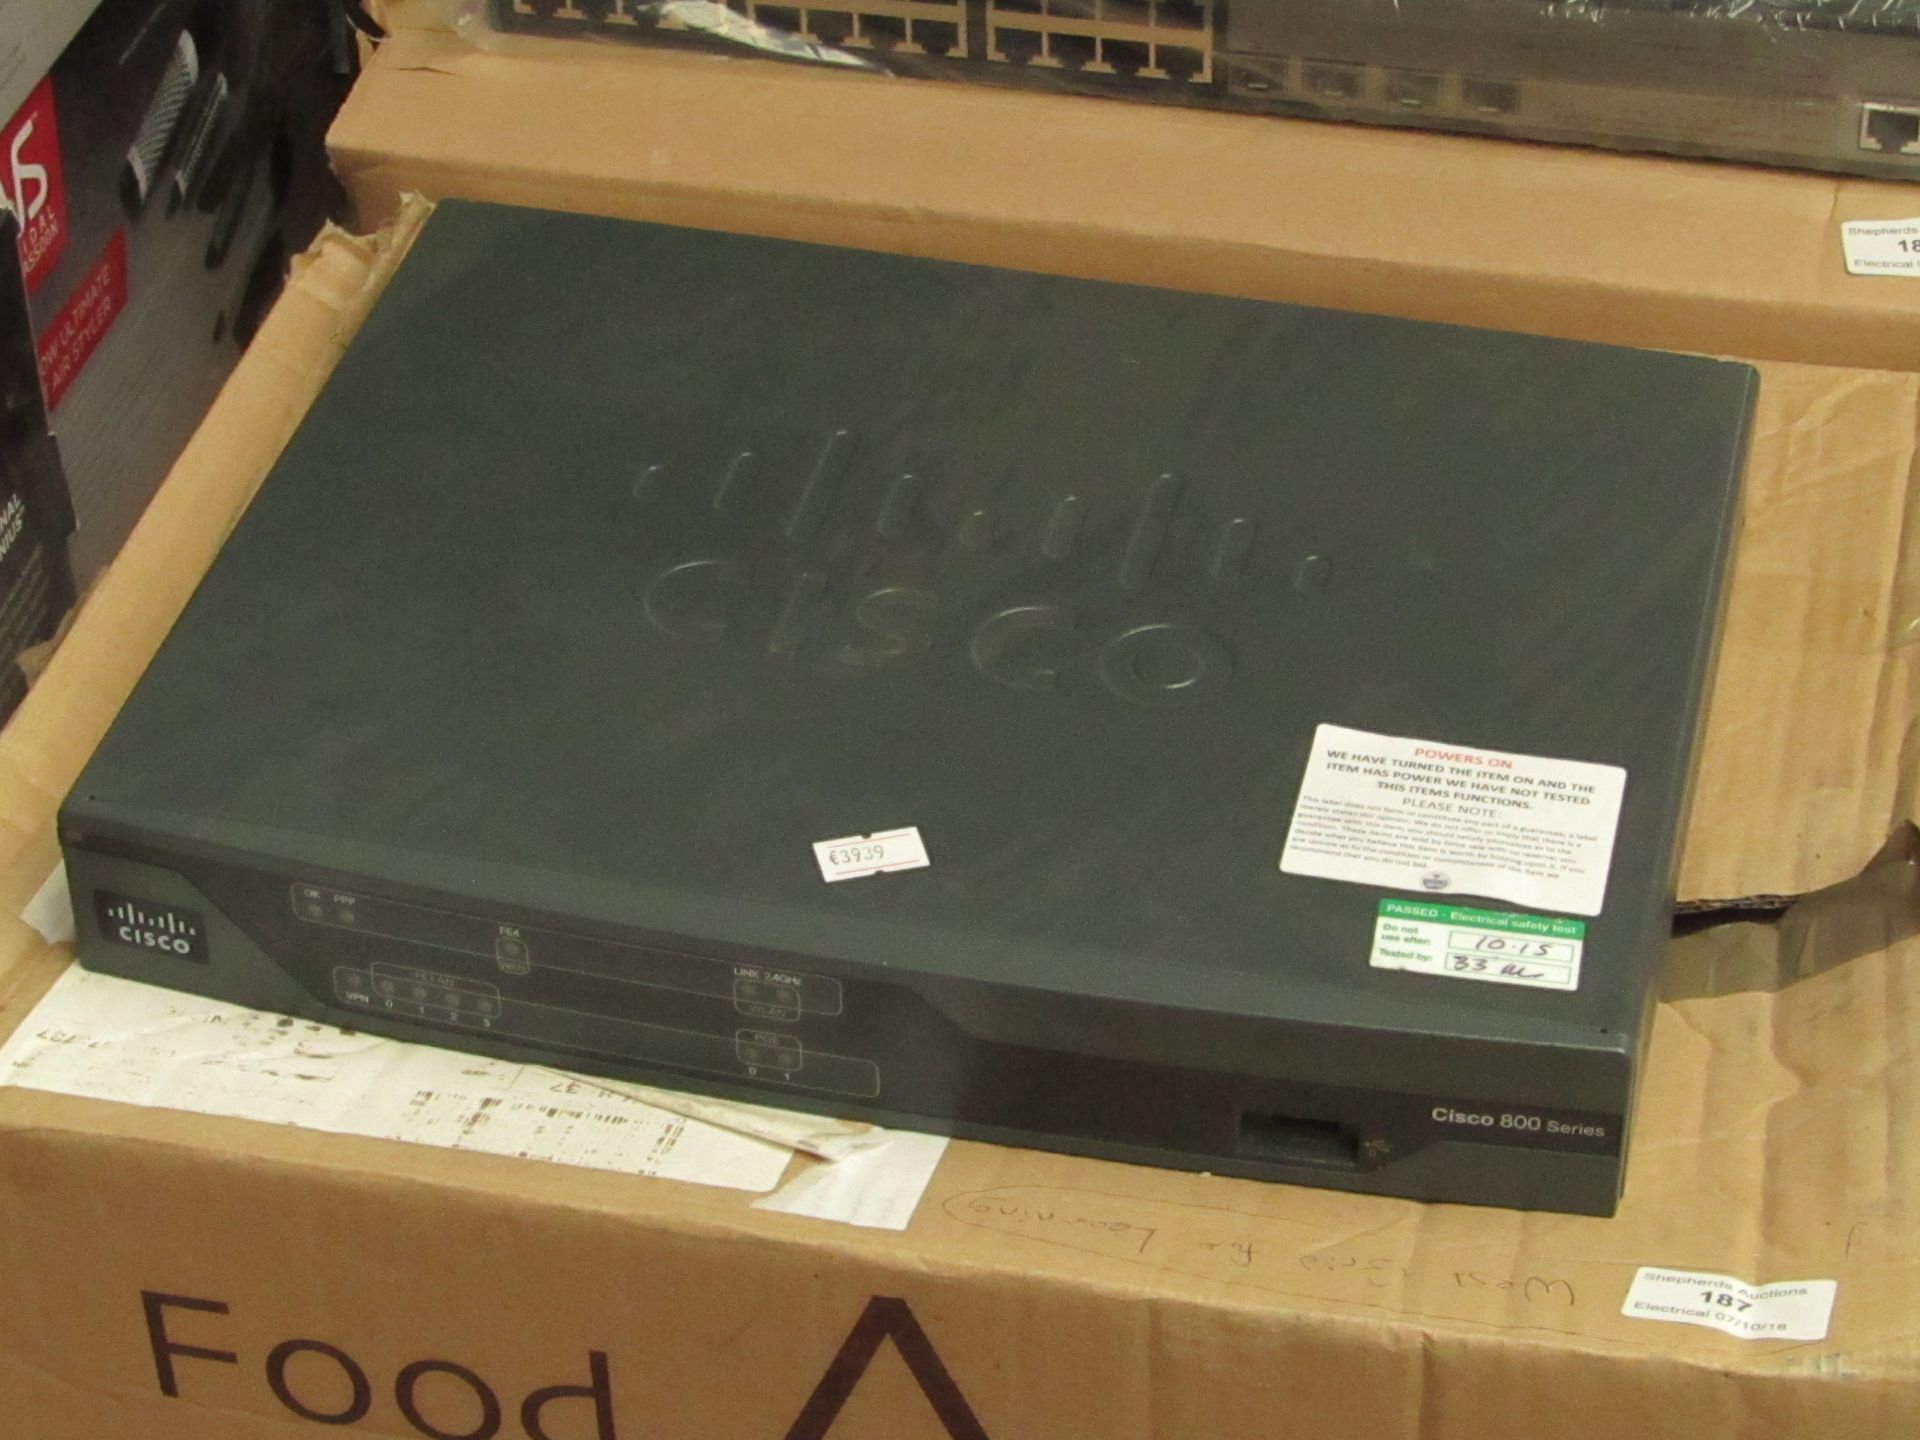 Cisco 800 Series router, untested and boxed.